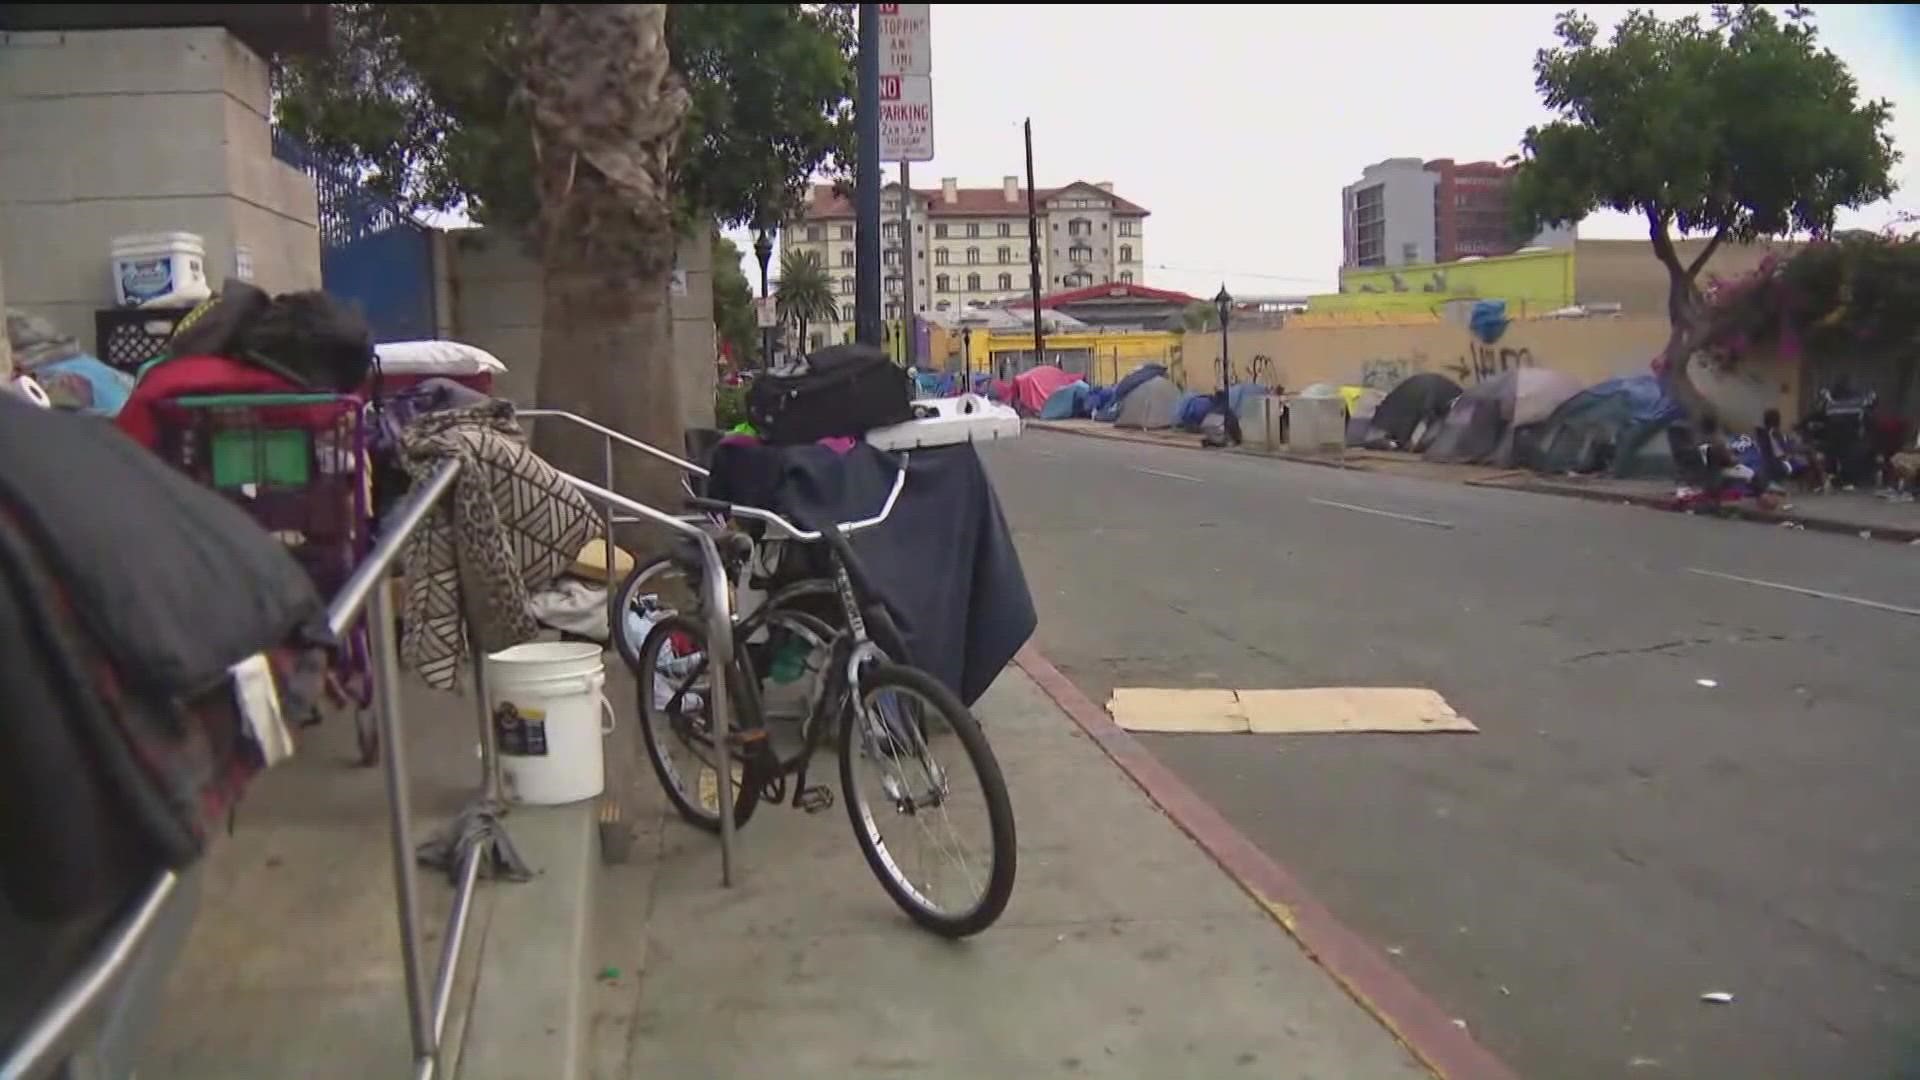 The count found 8,427 people experiencing homelessness across San Diego County, a minimum number.